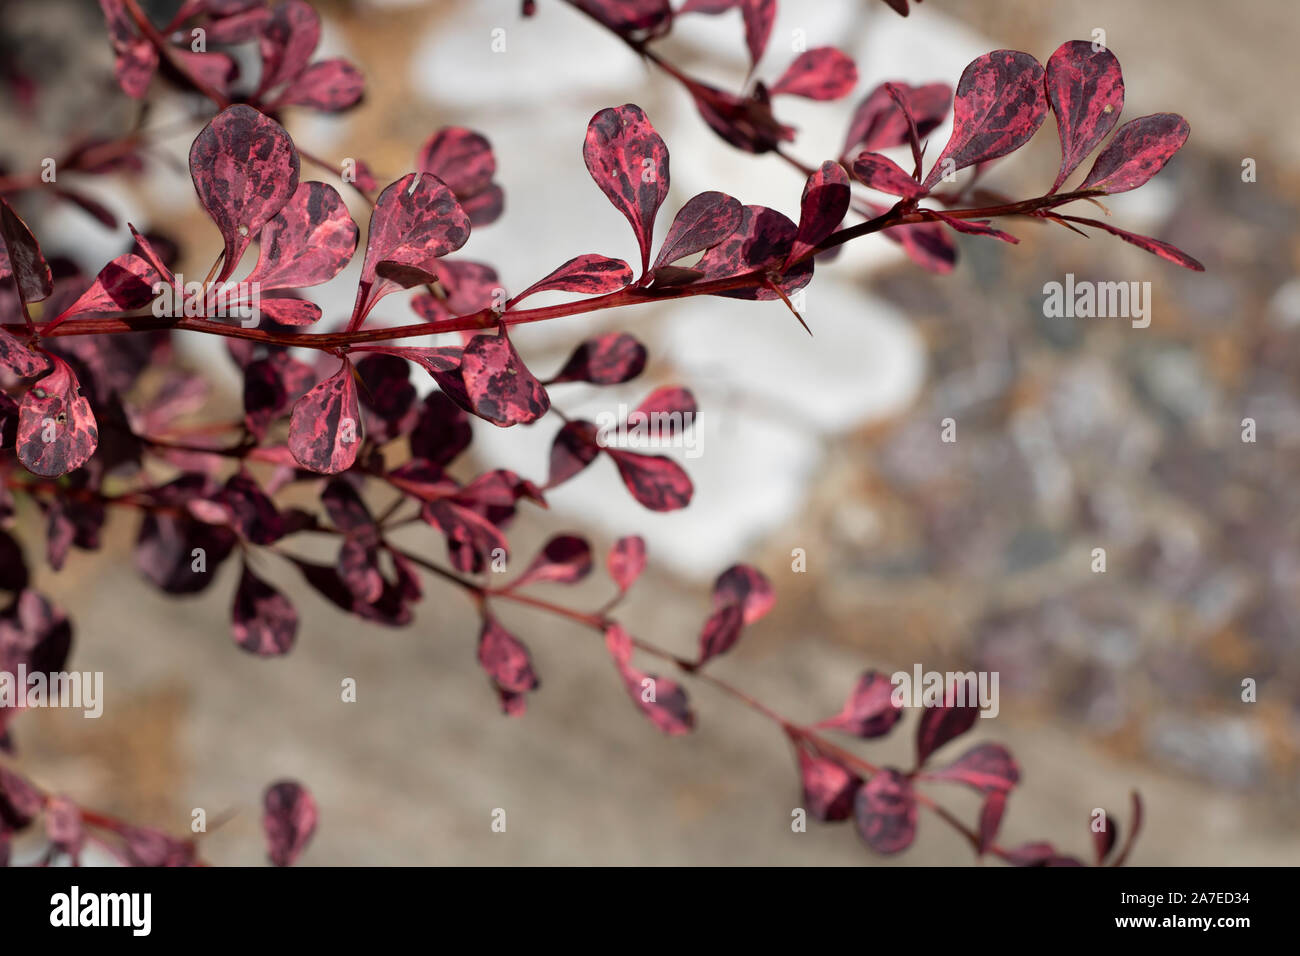 Close-up of branches and leaves of Iresine herbstii plant. It has dark purple colors. Photographed in summer .. Stock Photo